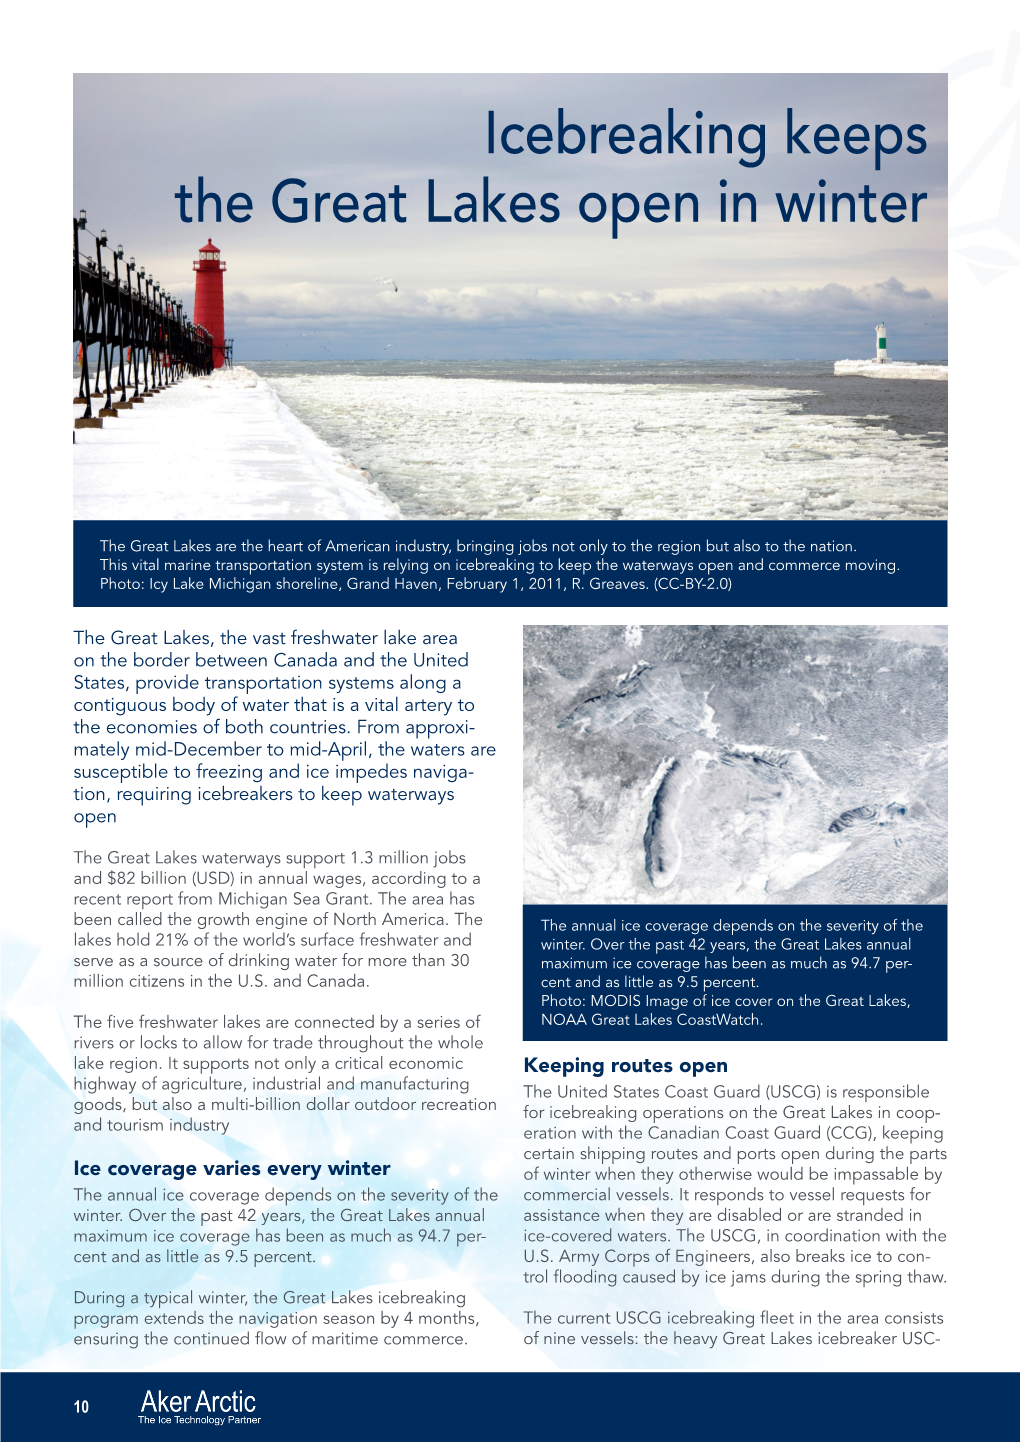 Icebreaking Keeps the Great Lakes Open in Winter